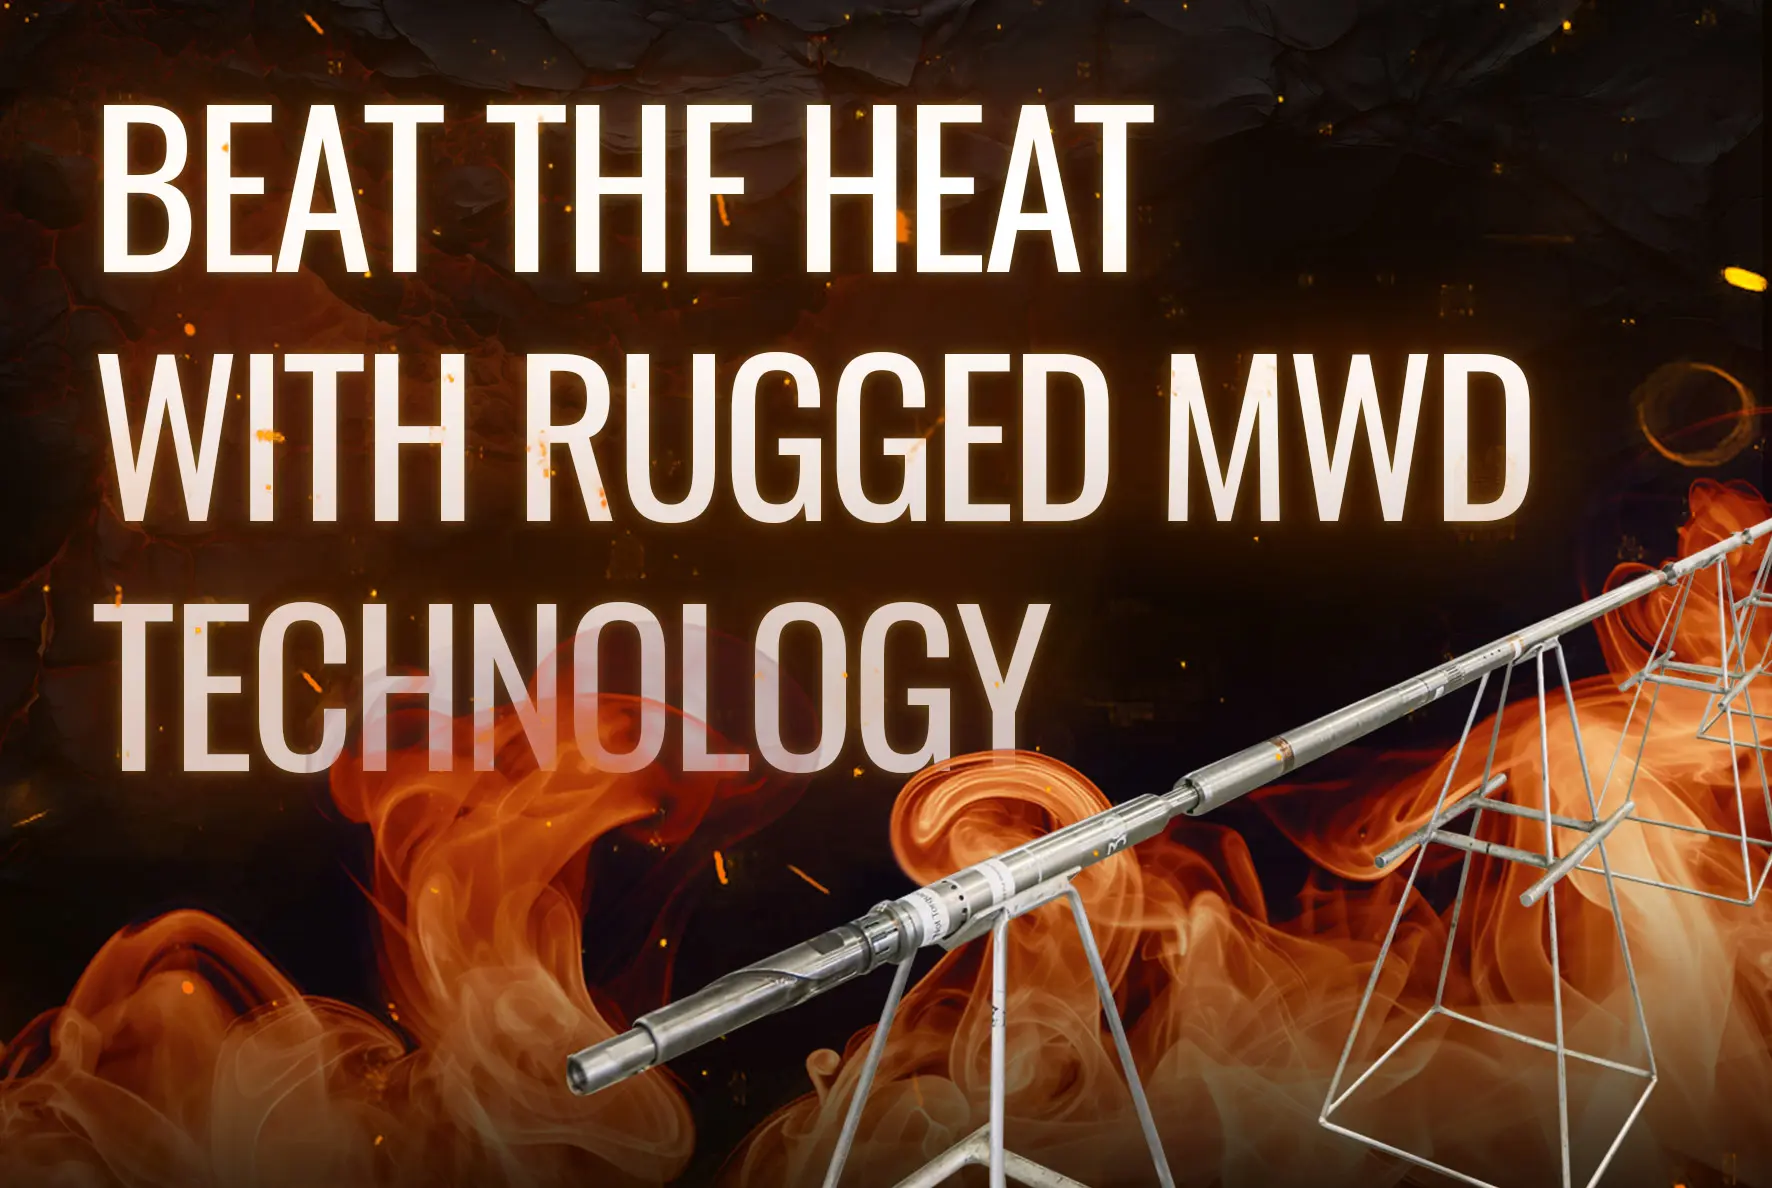 Featured image for “Beat The Heat With MWD Rugged Technology”